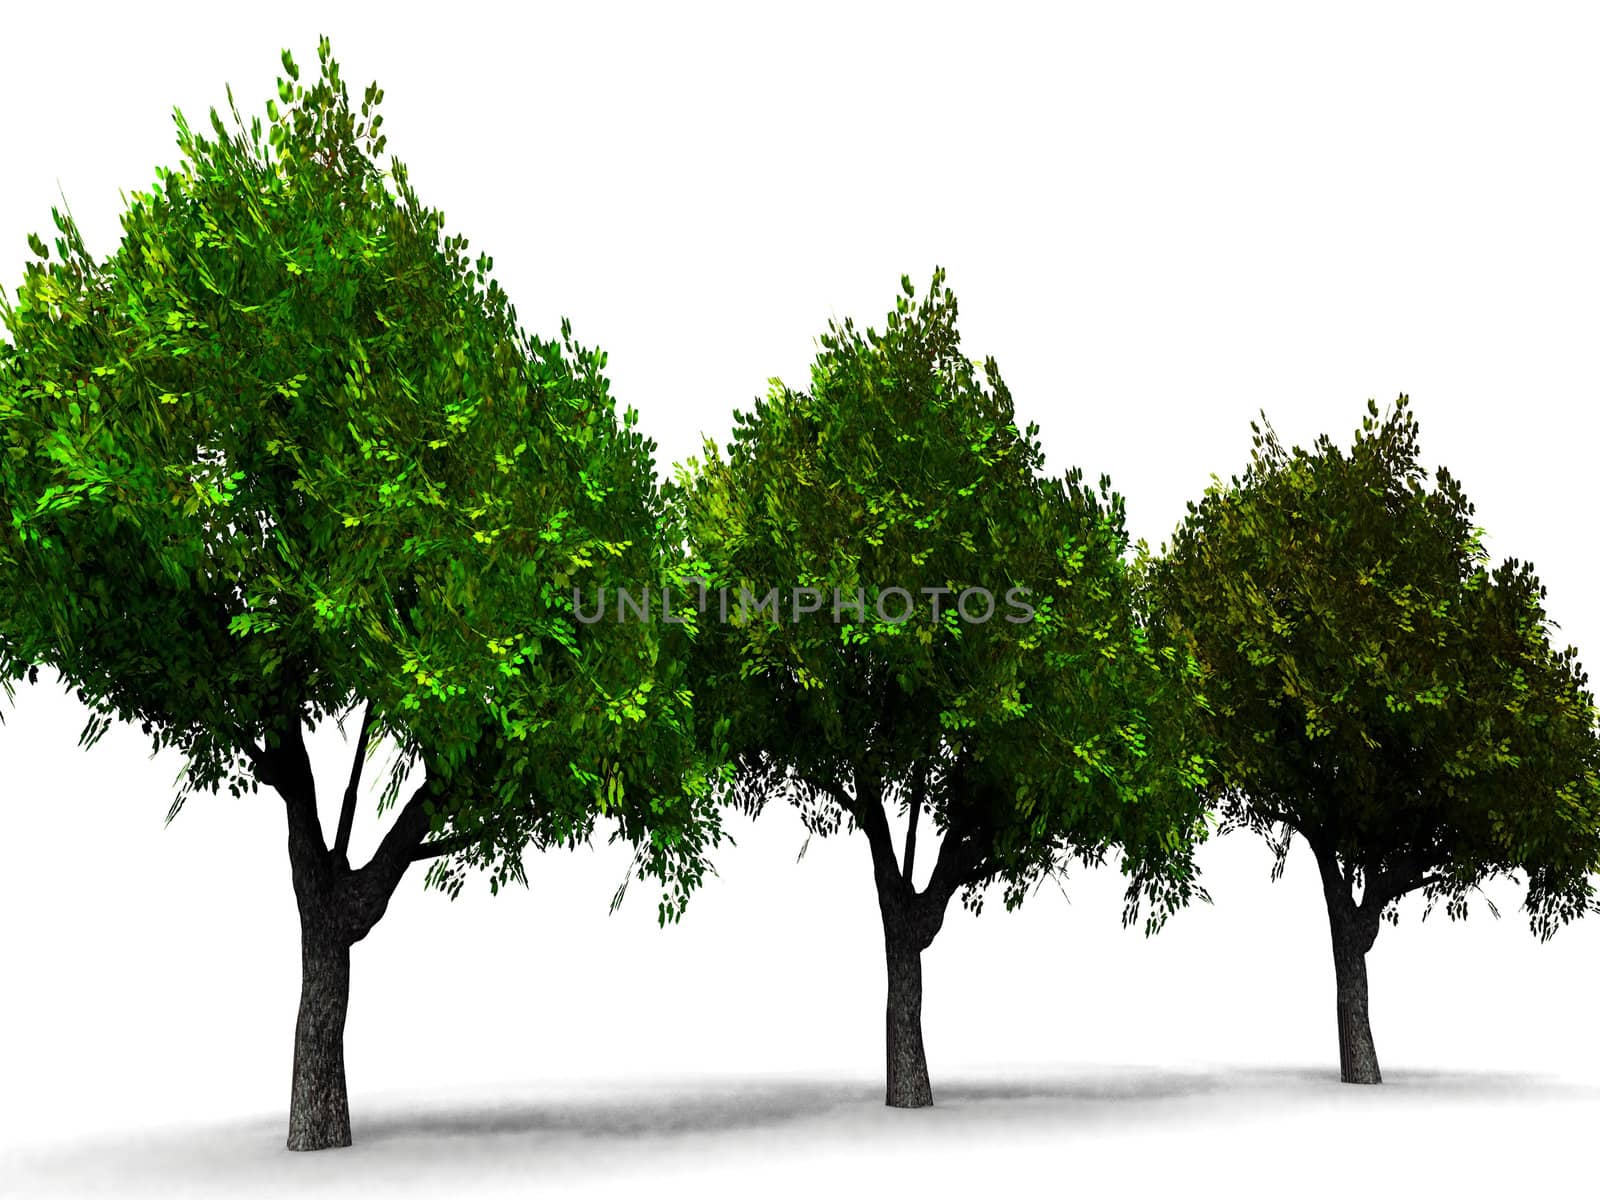 the green trees